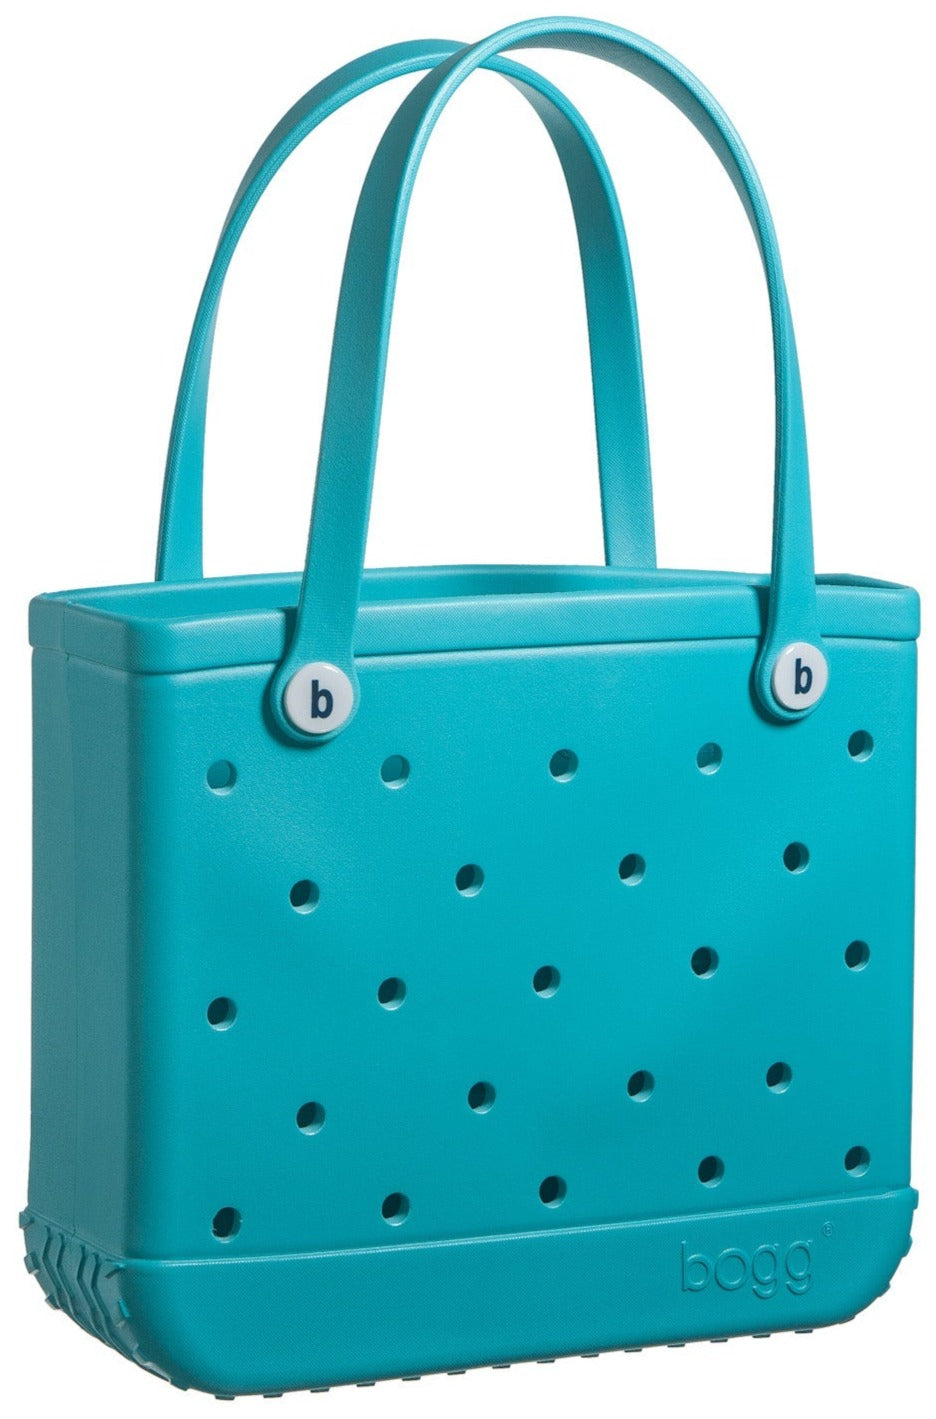 Baby Bogg Bag, New Colors